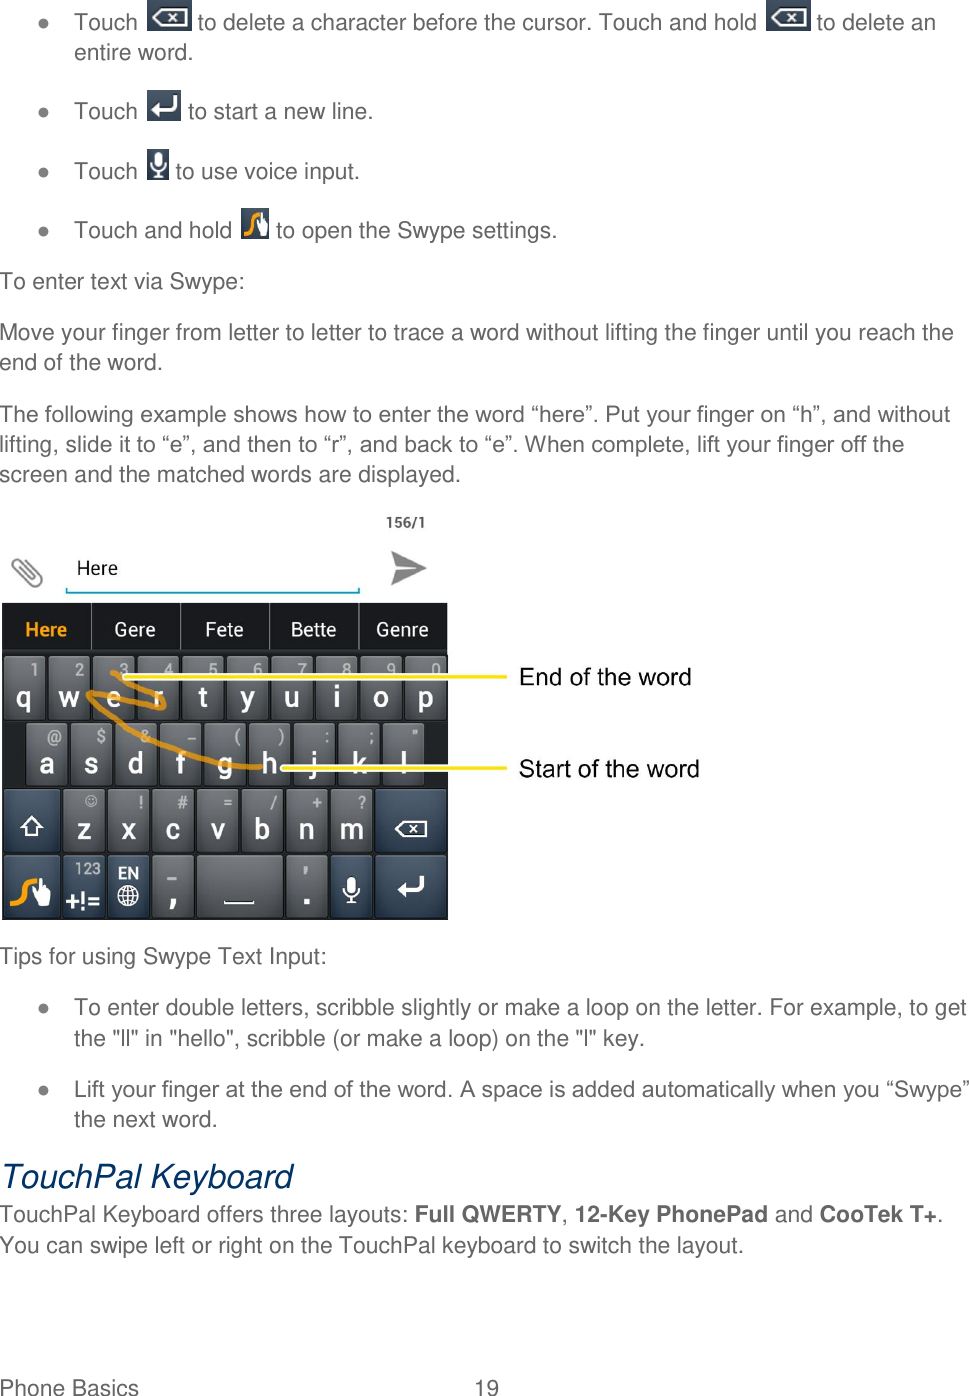 Phone Basics  19   ● Touch   to delete a character before the cursor. Touch and hold   to delete an entire word. ● Touch   to start a new line. ● Touch   to use voice input.  ● Touch and hold   to open the Swype settings. To enter text via Swype: Move your finger from letter to letter to trace a word without lifting the finger until you reach the end of the word.  The following example shows how to enter the word “here”. Put your finger on “h”, and without lifting, slide it to “e”, and then to “r”, and back to “e”. When complete, lift your finger off the screen and the matched words are displayed.  Tips for using Swype Text Input: ● To enter double letters, scribble slightly or make a loop on the letter. For example, to get the &quot;ll&quot; in &quot;hello&quot;, scribble (or make a loop) on the &quot;l&quot; key. ● Lift your finger at the end of the word. A space is added automatically when you “Swype” the next word. TouchPal Keyboard TouchPal Keyboard offers three layouts: Full QWERTY, 12-Key PhonePad and CooTek T+. You can swipe left or right on the TouchPal keyboard to switch the layout.  